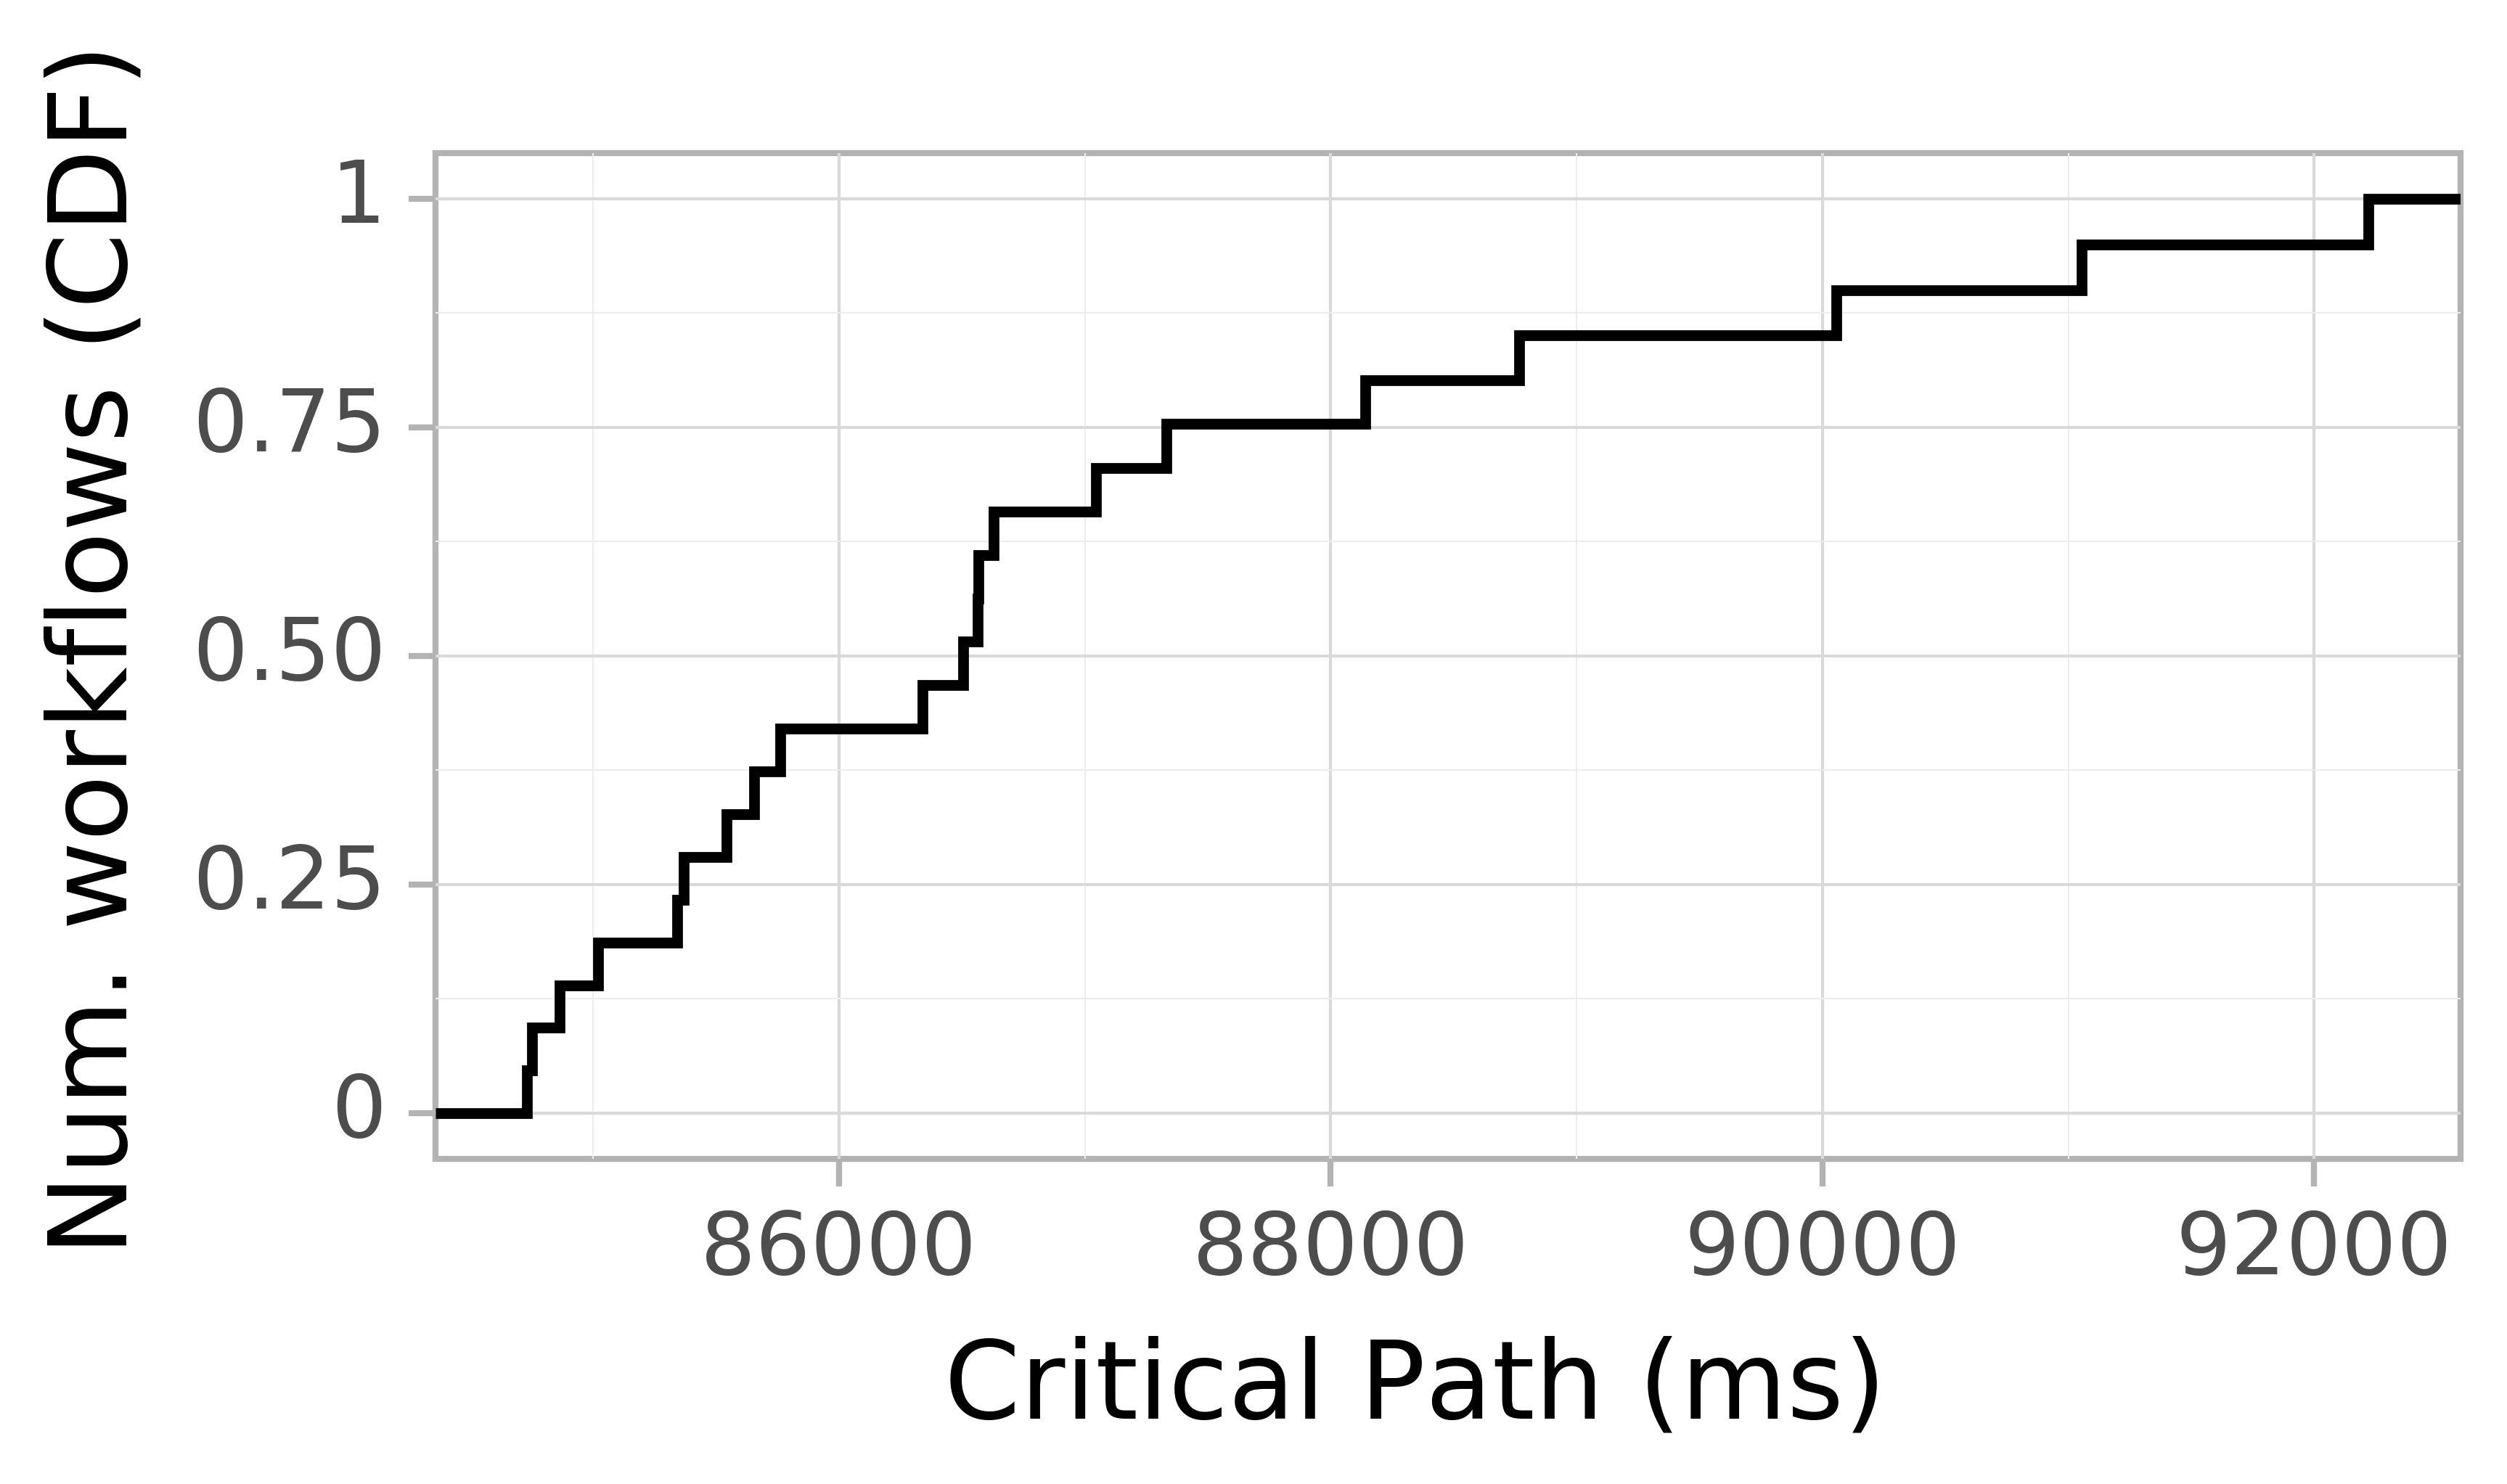 Job runtime CDF graph for the askalon-new_ee14 trace.